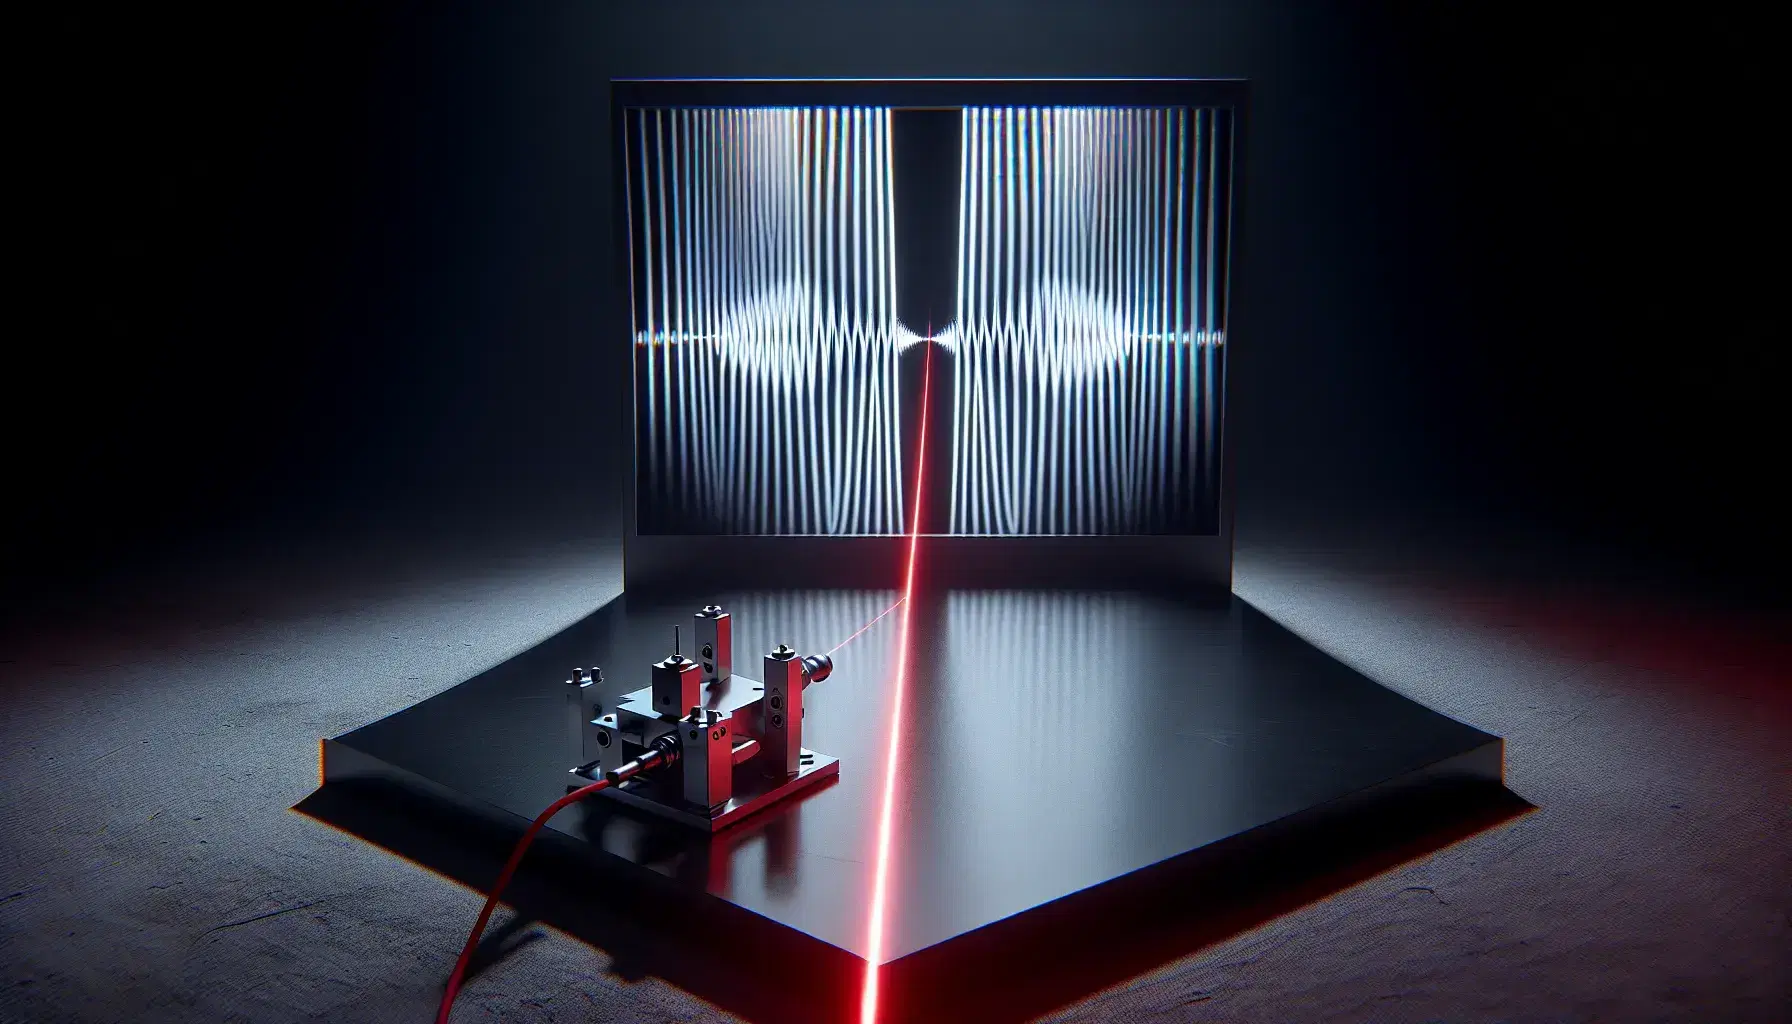 Double-slit experiment demonstrating wave-particle duality with a red laser beam creating an interference pattern of bright and dark bands on a screen.